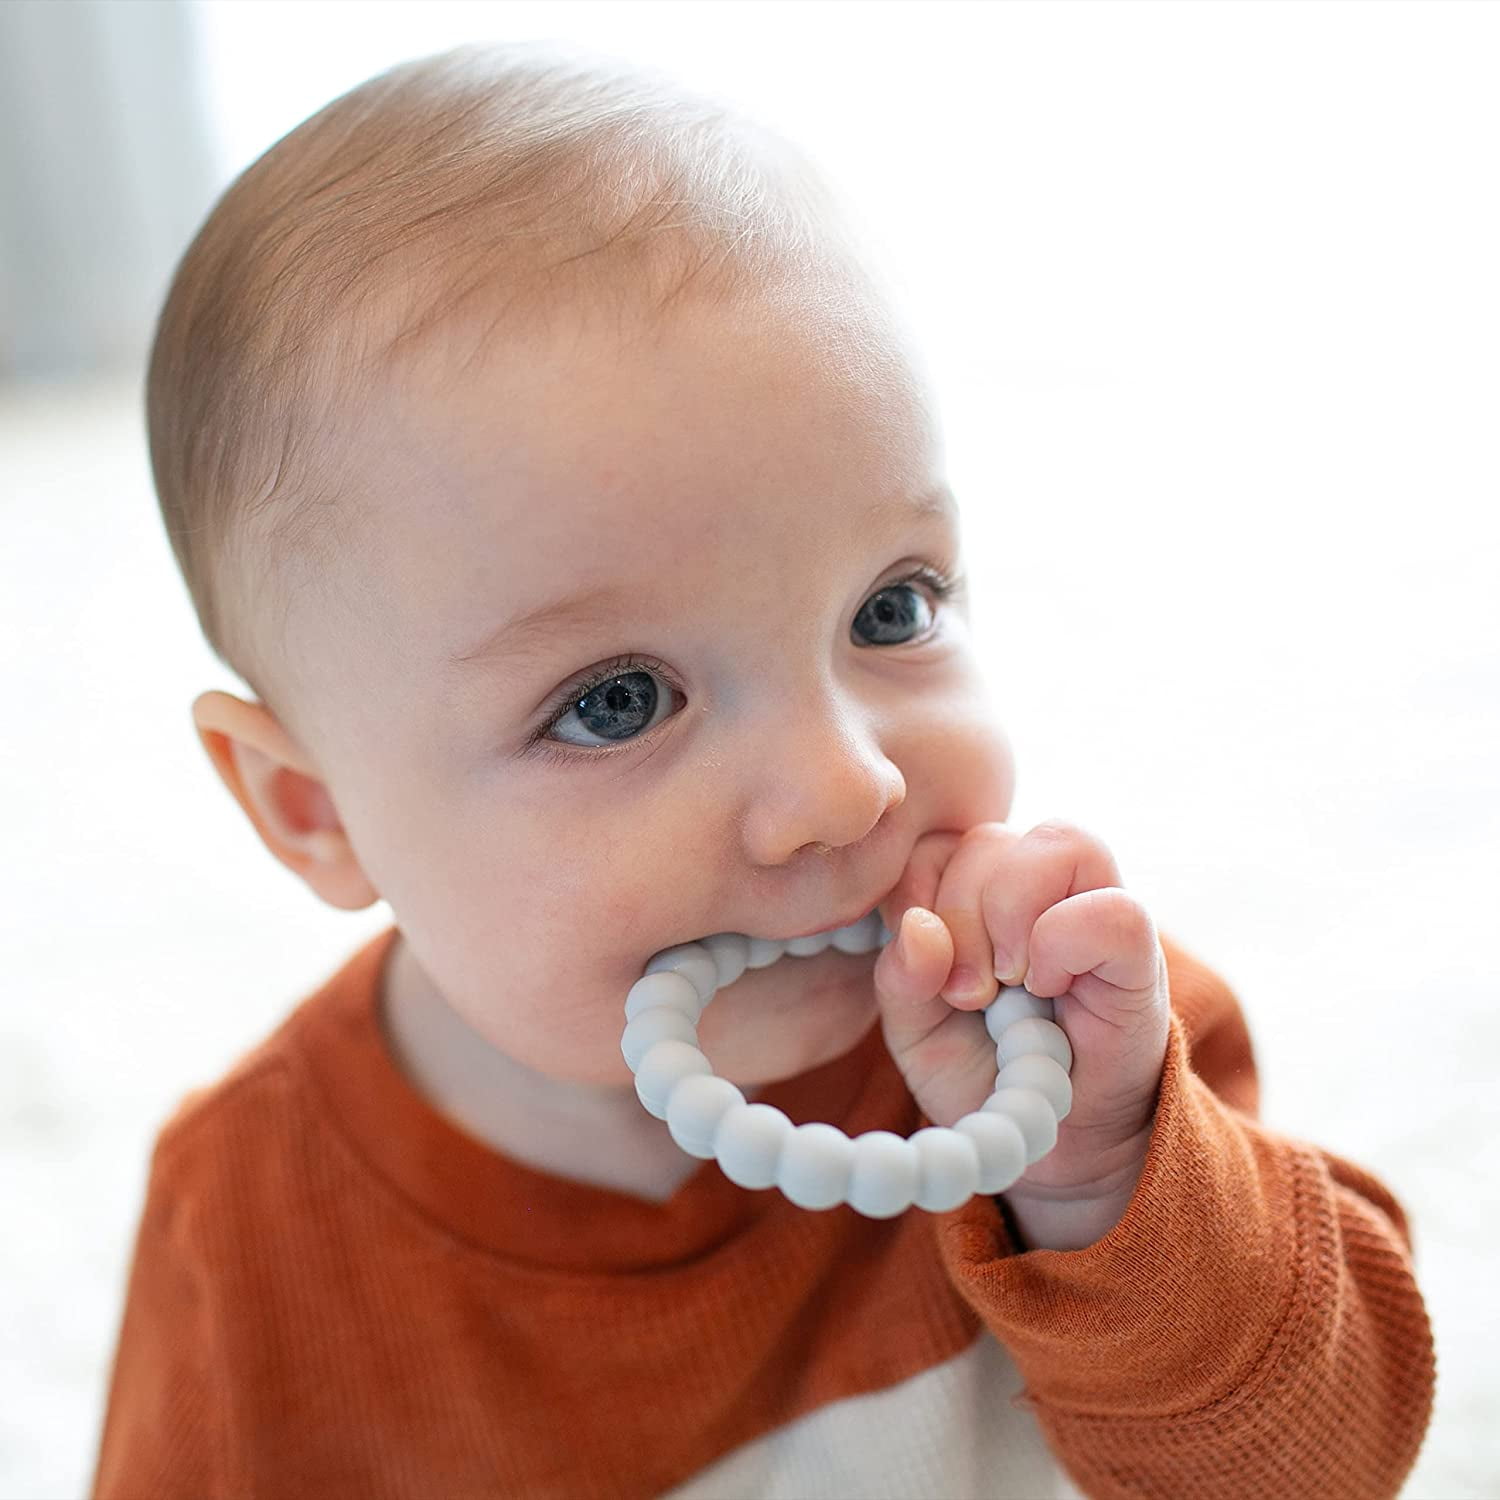 Amazon.com : Baby Teething Toys - Btrfe Silicone Teether for Babies 0-6  Months, Soft Teething Ring with 3 Teethers, Baby chew Toy to Soothe Gums,  Colorful Baby Links with Multiple Raised Texture : Baby